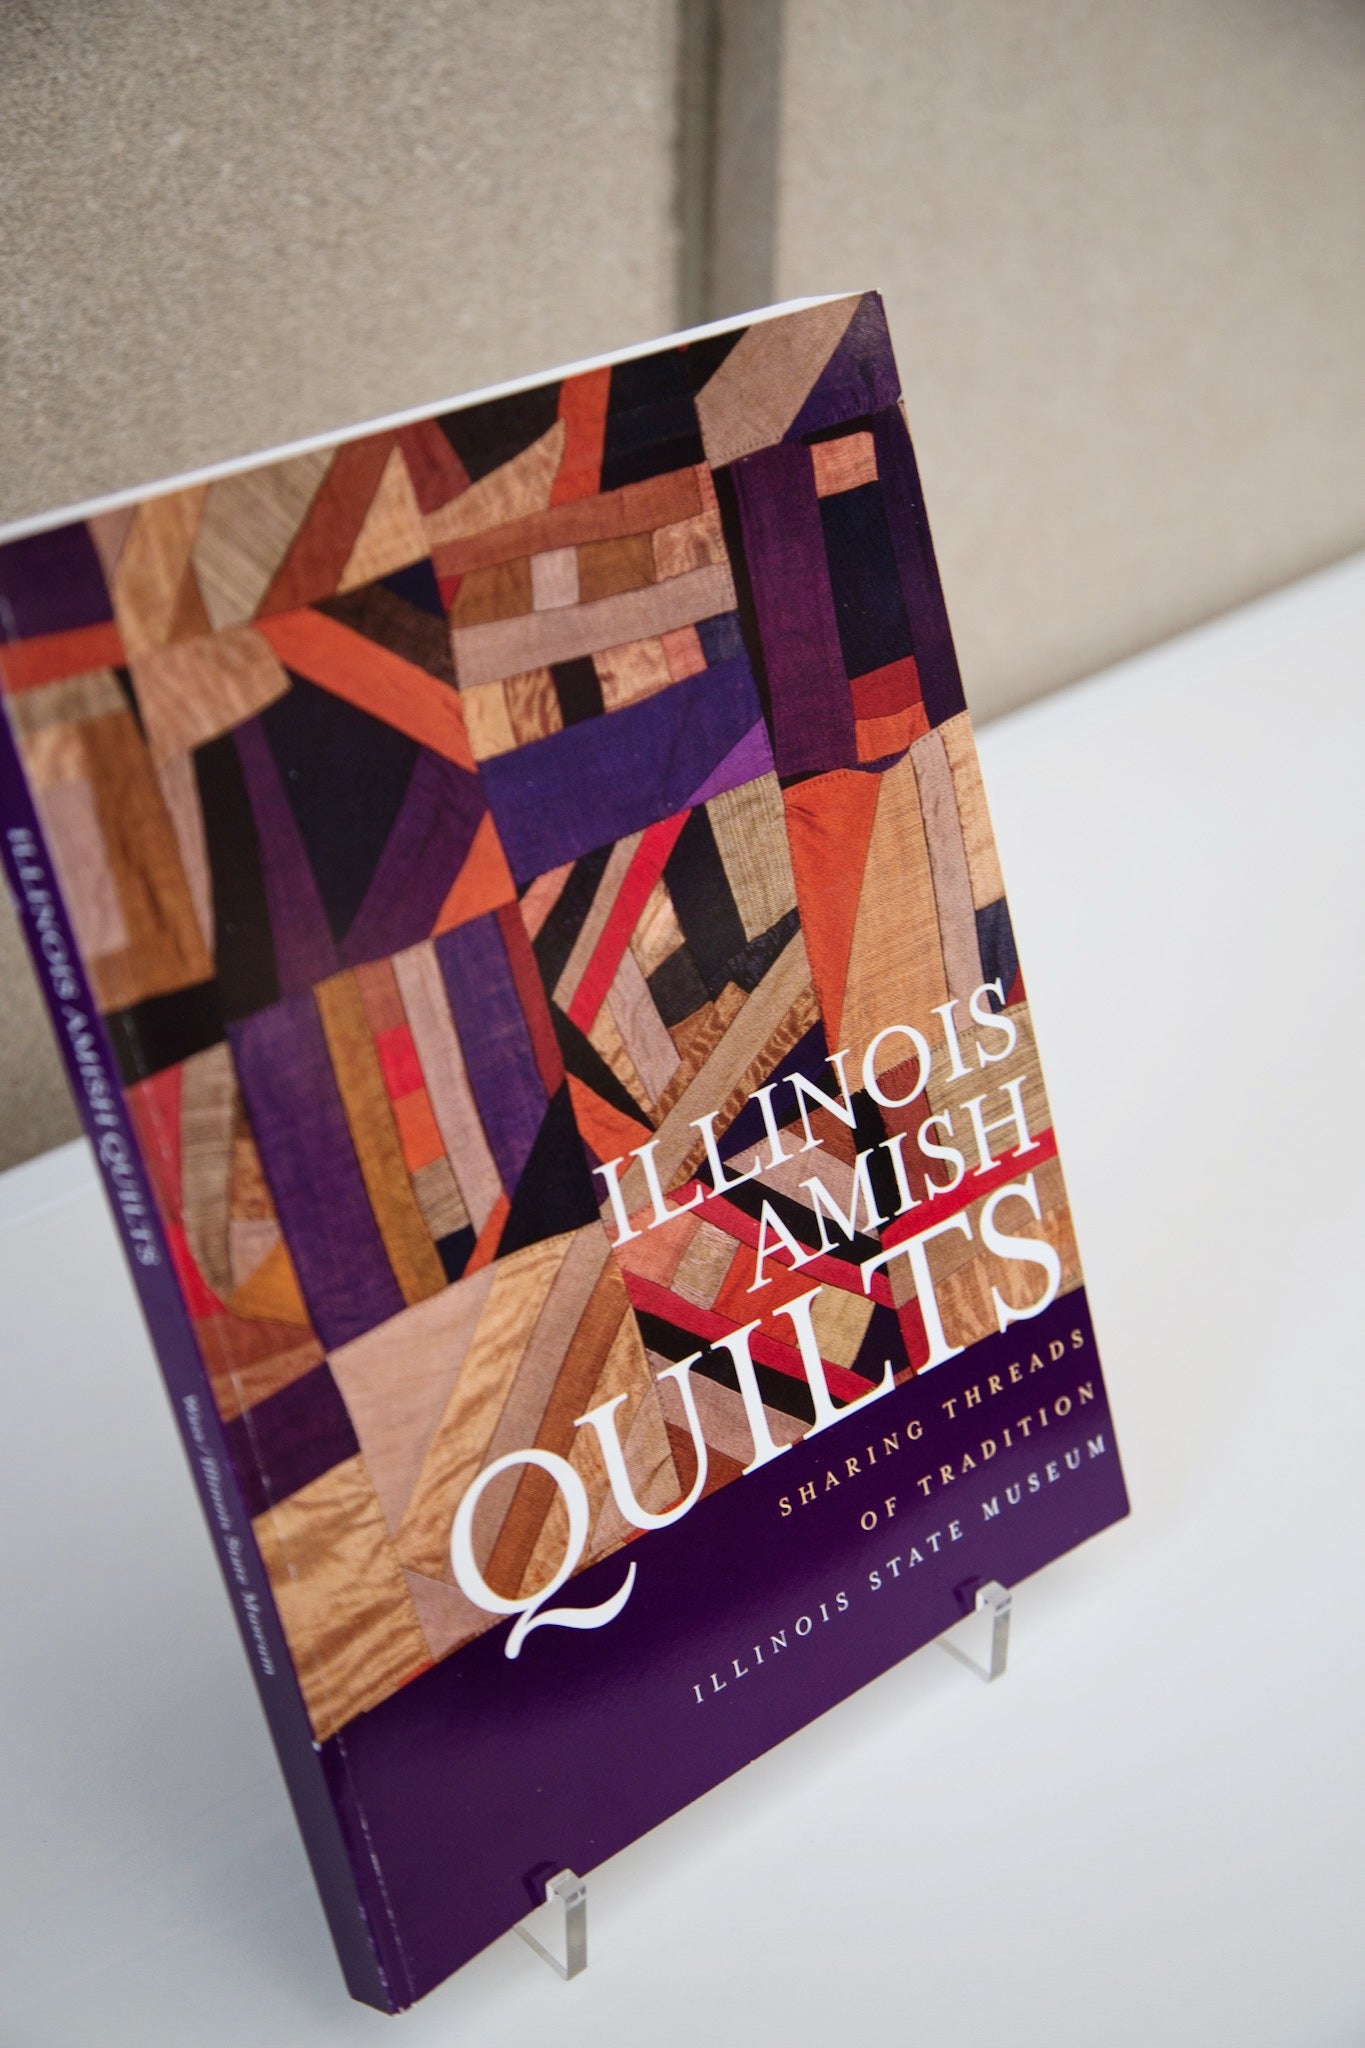 The cover photo for the soft bound “Illinois Amish Quilts: Sharing Threads of Tradition”.